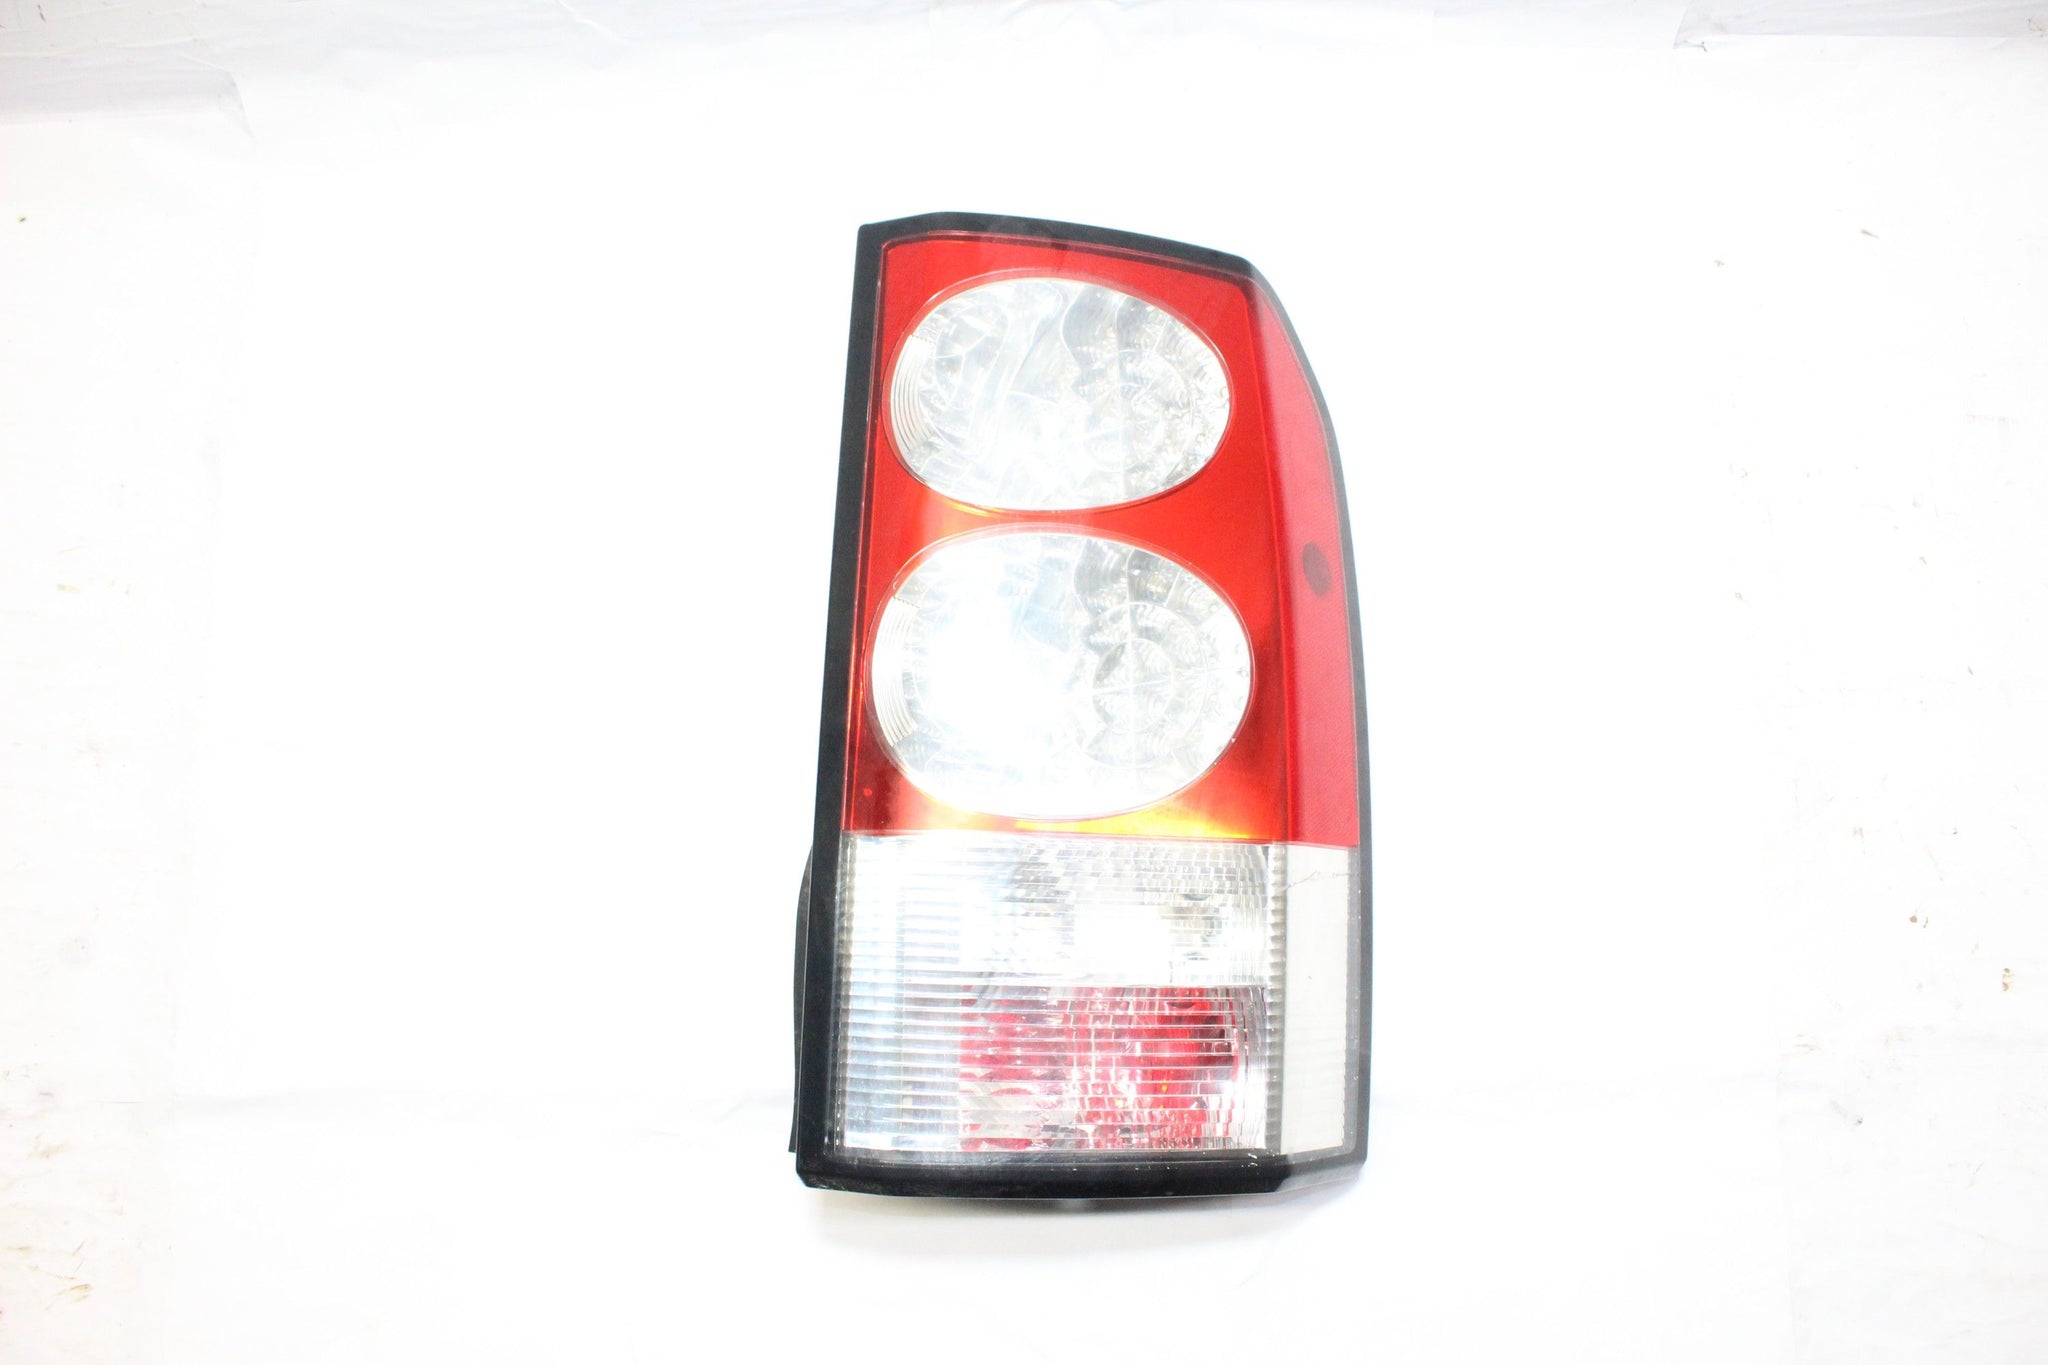 LAND ROVER DISCOVERY 4 Rear Right Tail Light 2011 AH22-13404-AC